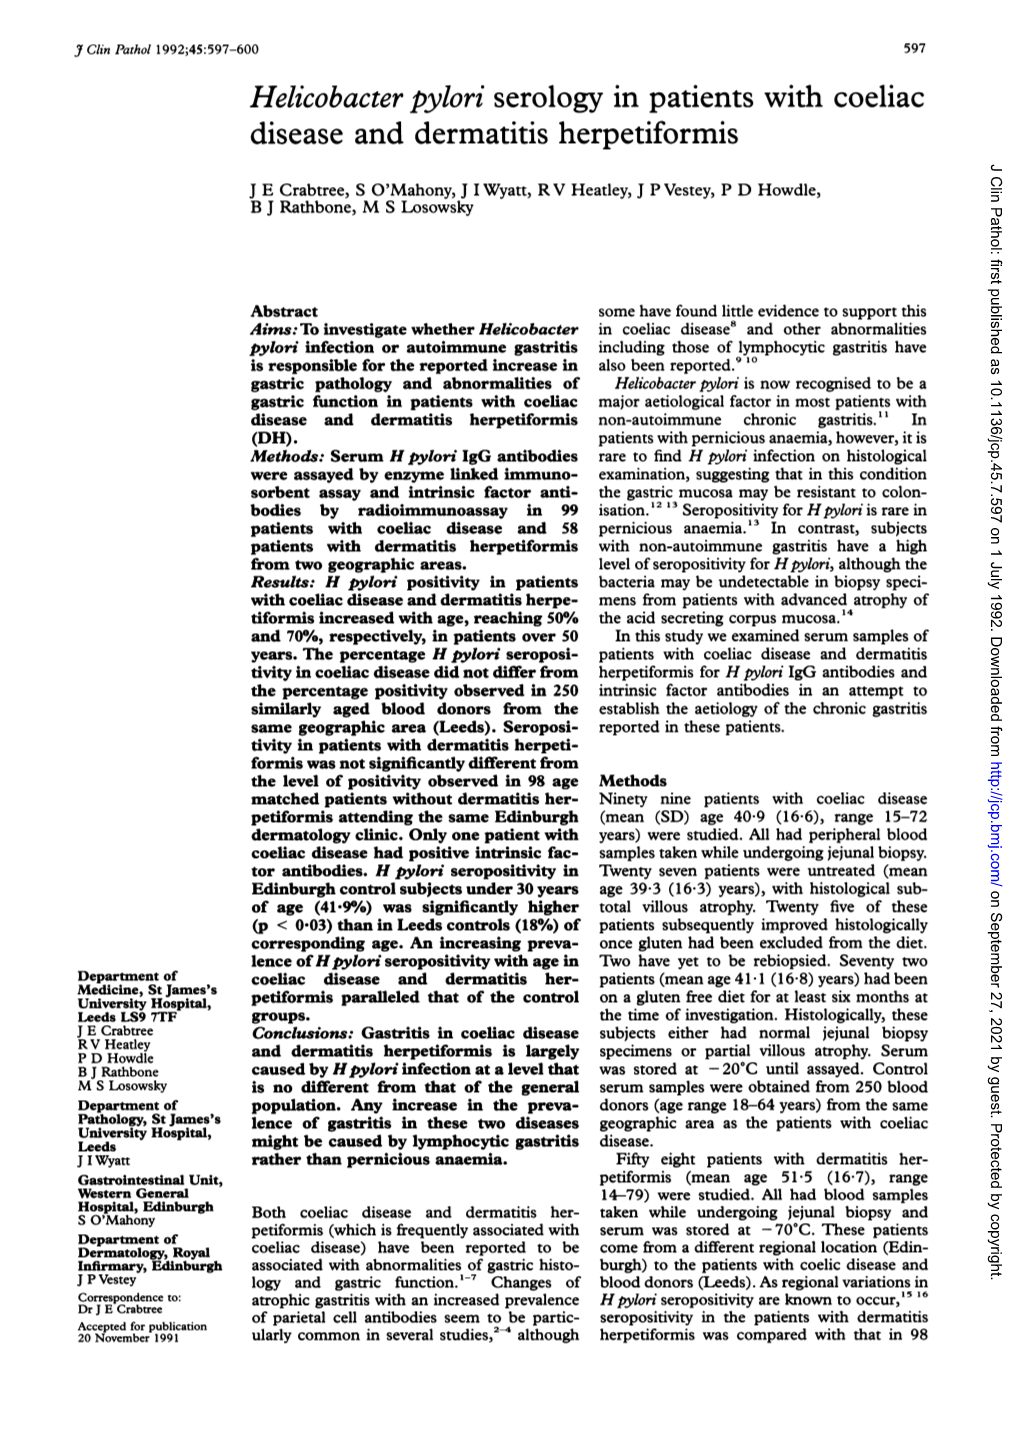 Helicobacter Pylori Serology in Patients with Coeliac Disease and Dermatitis Herpetiformis J Clin Pathol: First Published As 10.1136/Jcp.45.7.597 on 1 July 1992